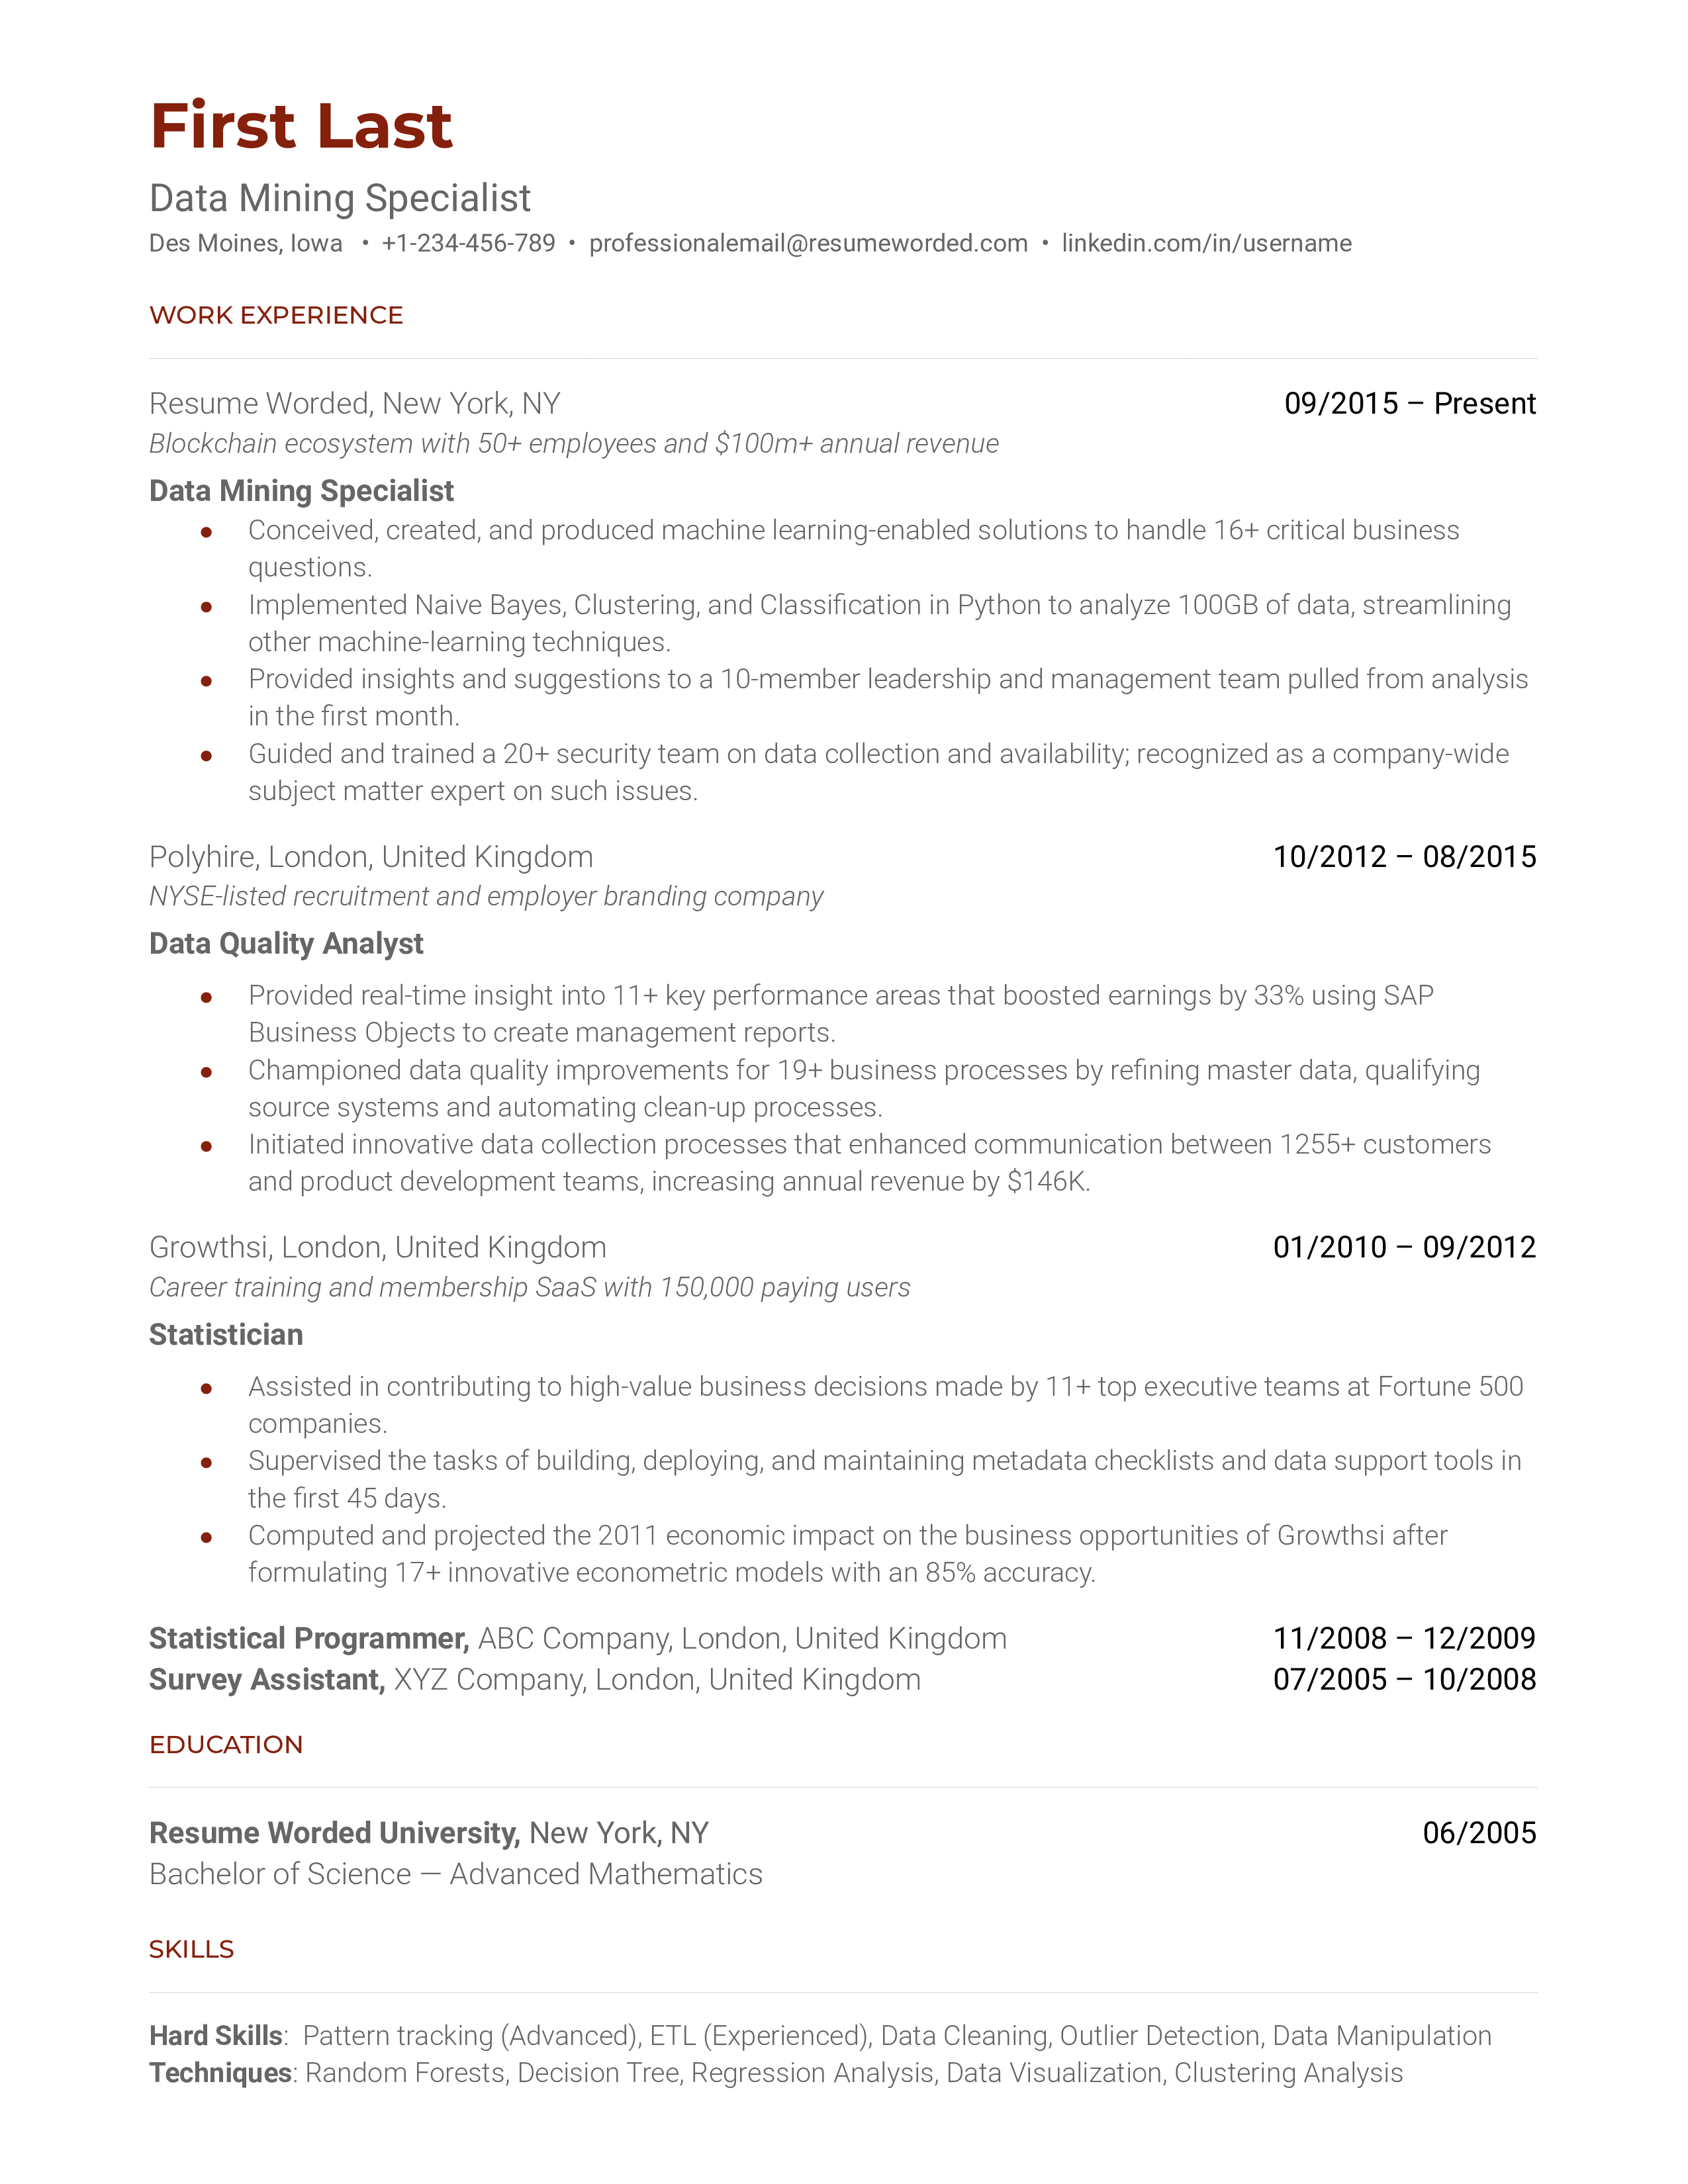 A data mining specialist resume template including only industry-relevant experience.